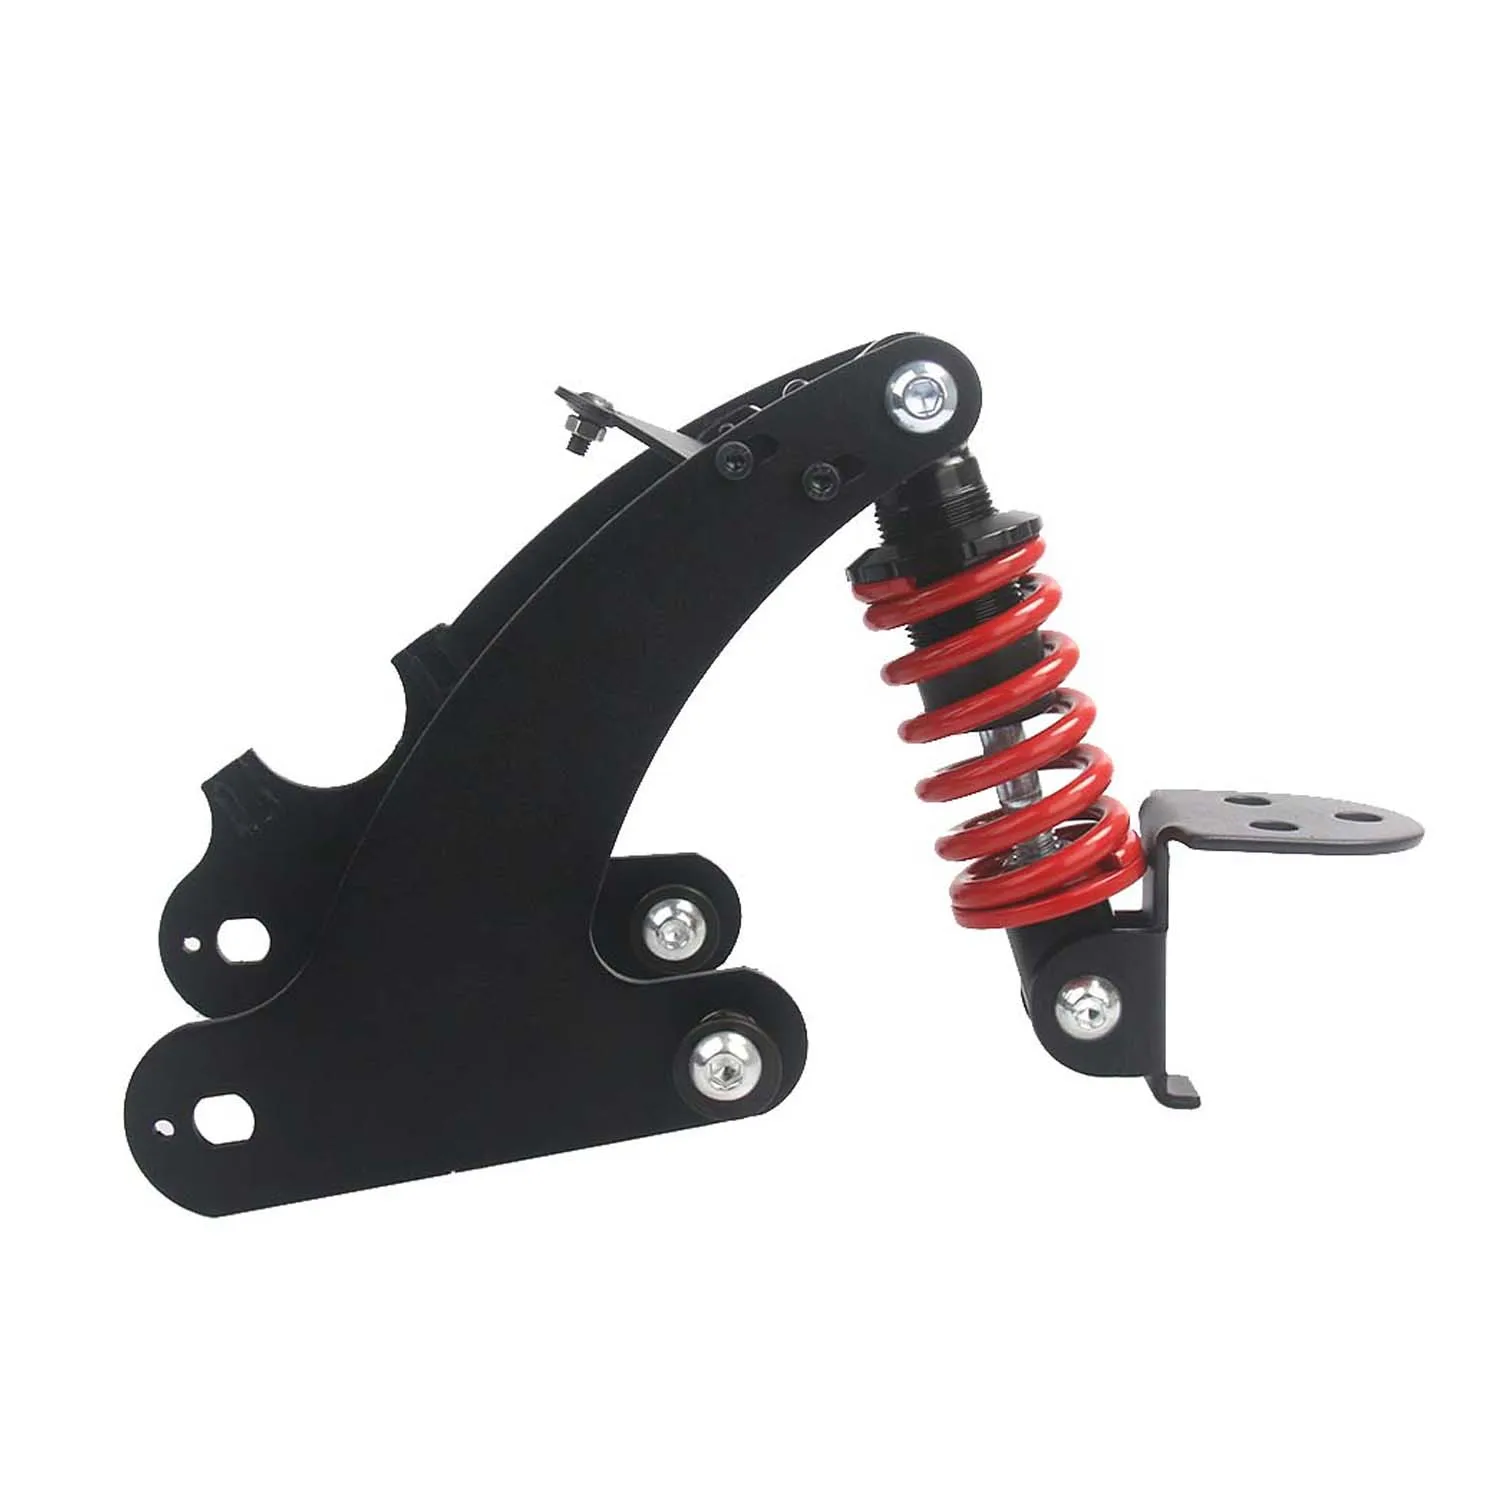 Details about   Hydraulic Anti-Shock Rear Suspension Kit for Xiaomi M365/1S/PRO Electric Scooter 